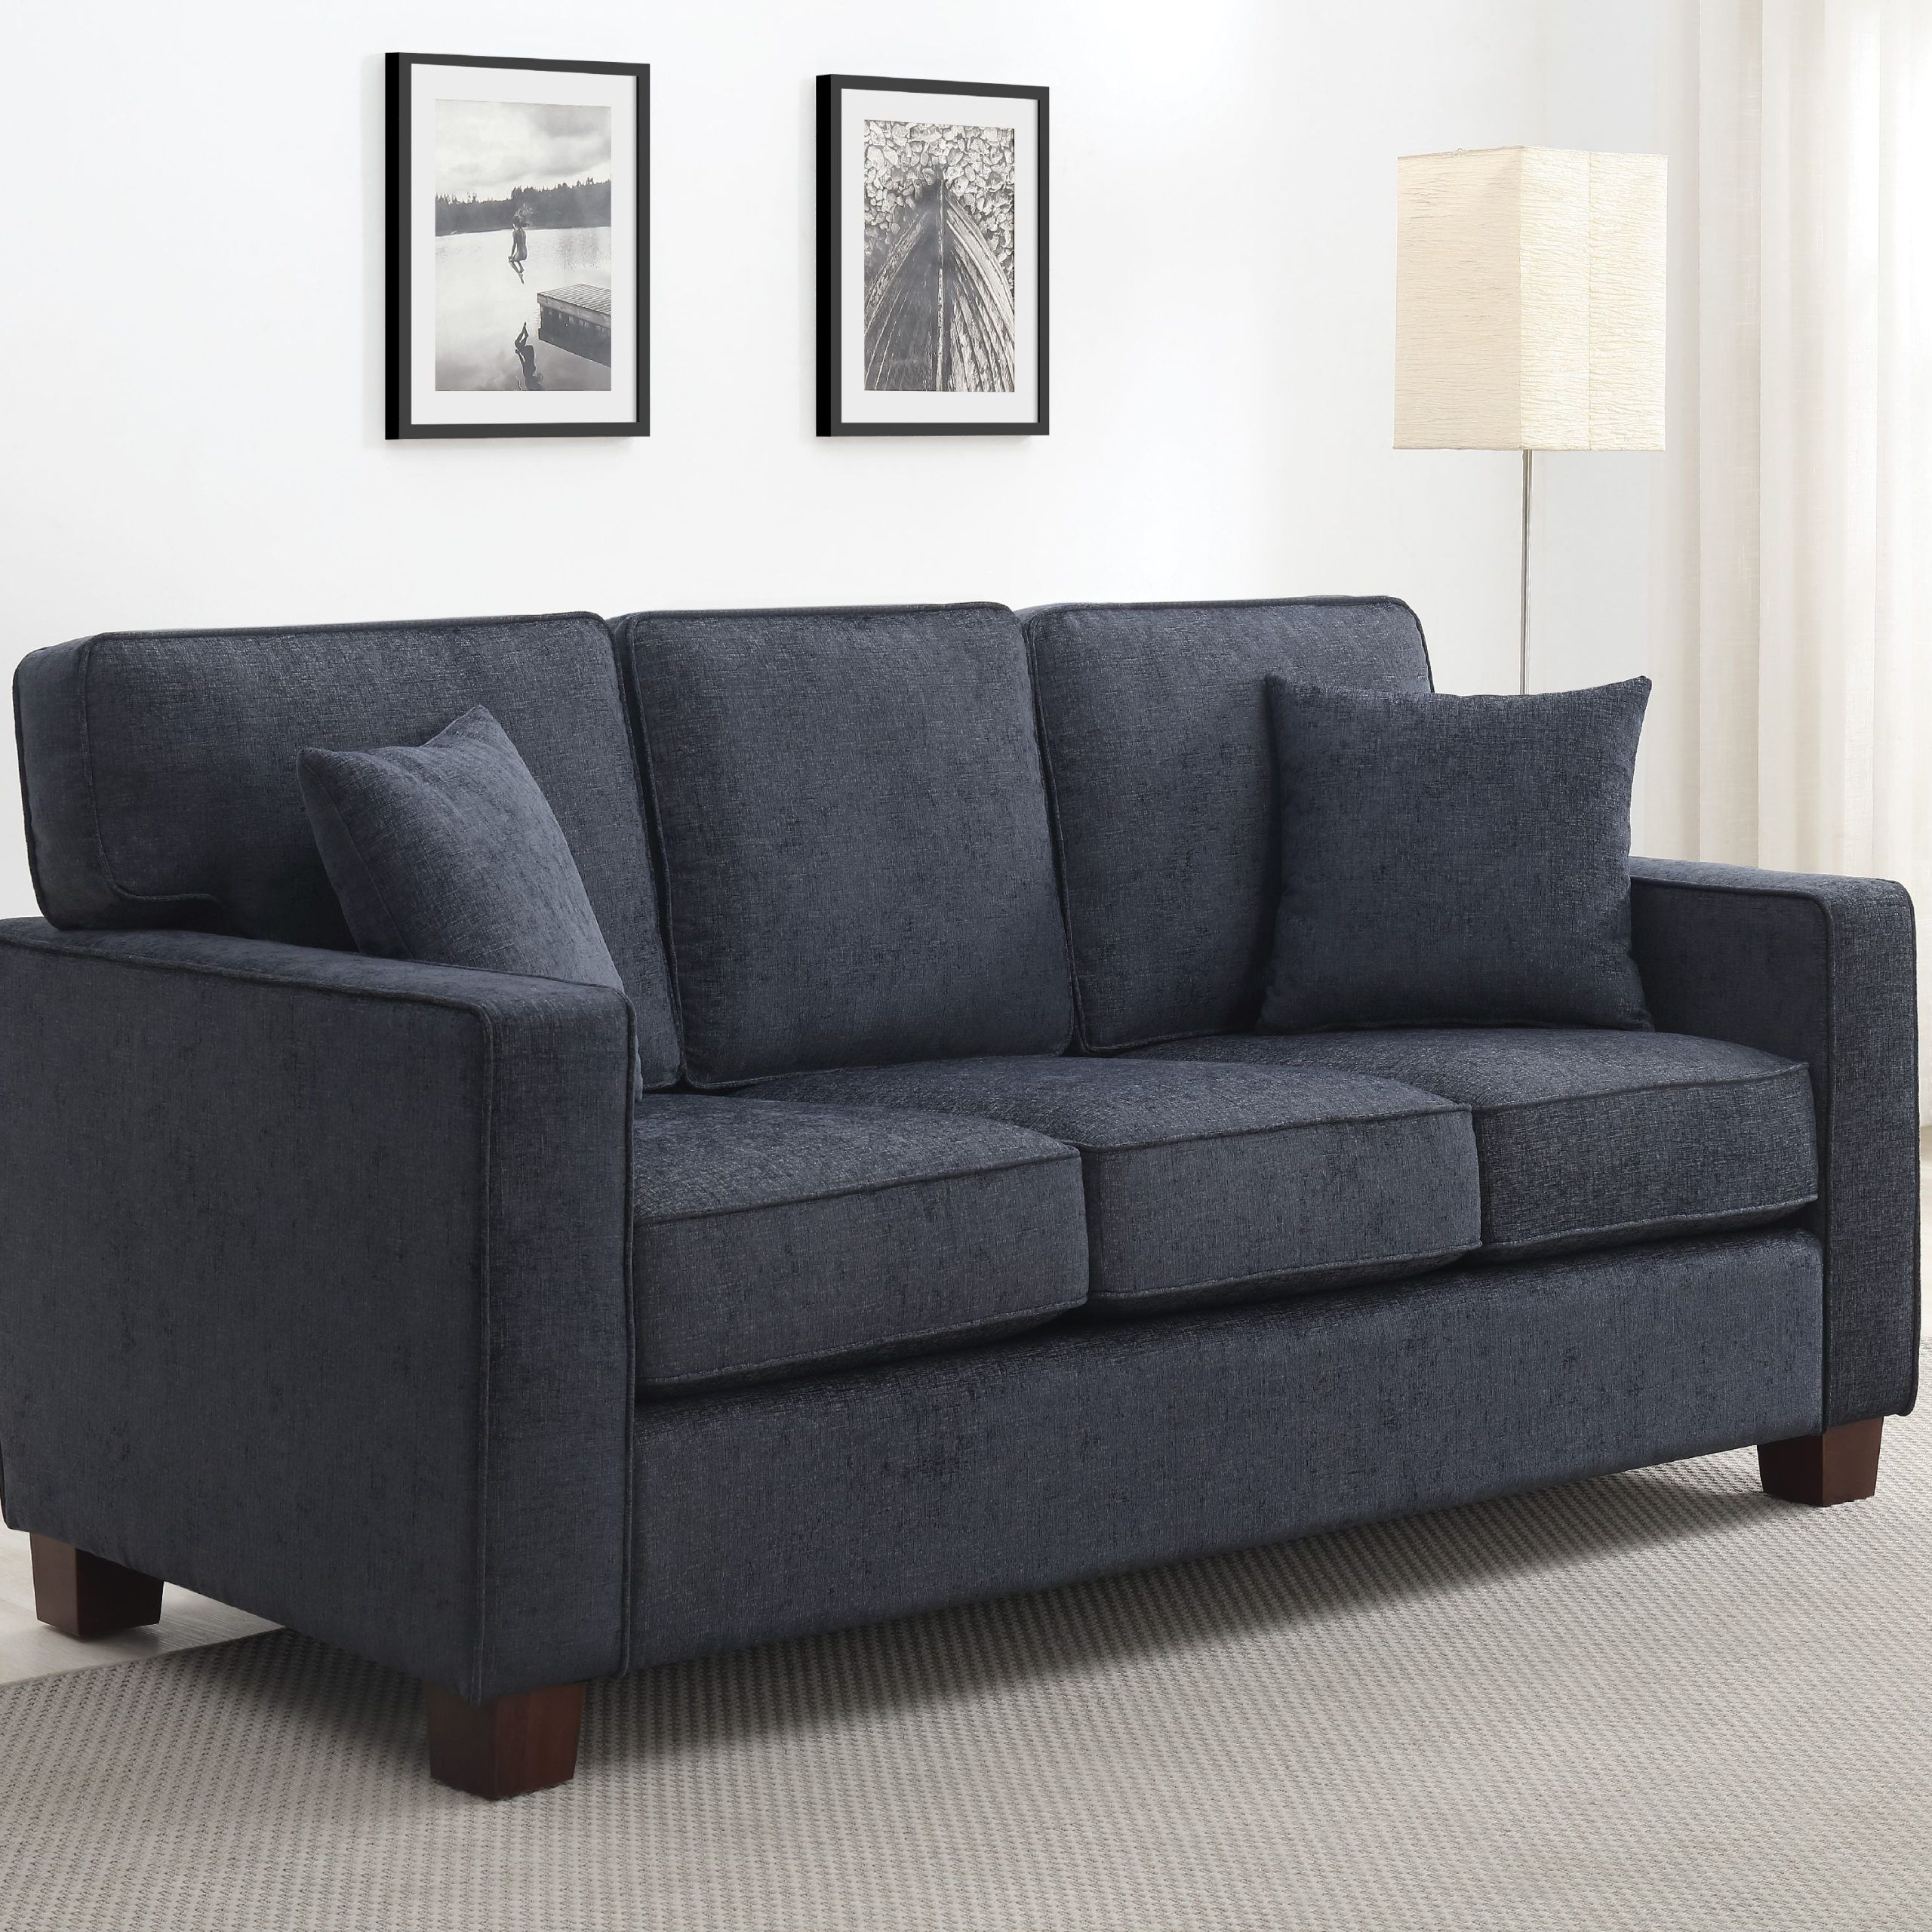 Osp Home Furnishings Russell 3 Seater Sofa In Navy Fabric 3/ctn Inside Navy Sleeper Sofa Couches (View 13 of 20)